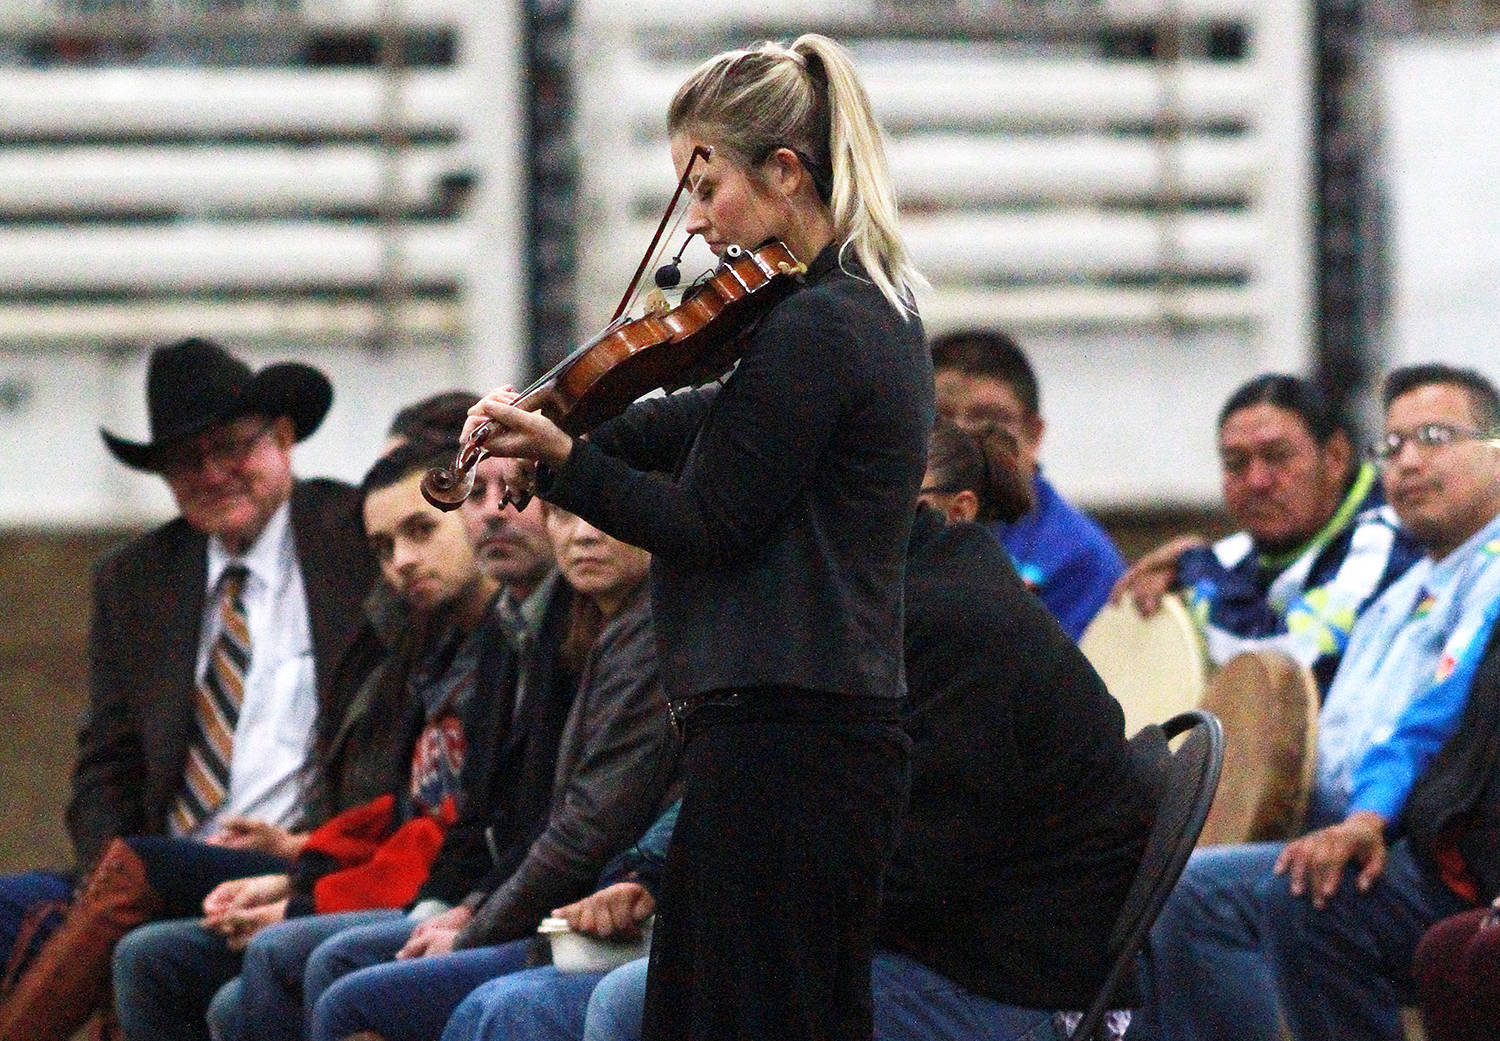 Former 2013 Miss Rodeo Canada Gillian Grant plays the violin in honour of rodeo legend Winston Bruce.